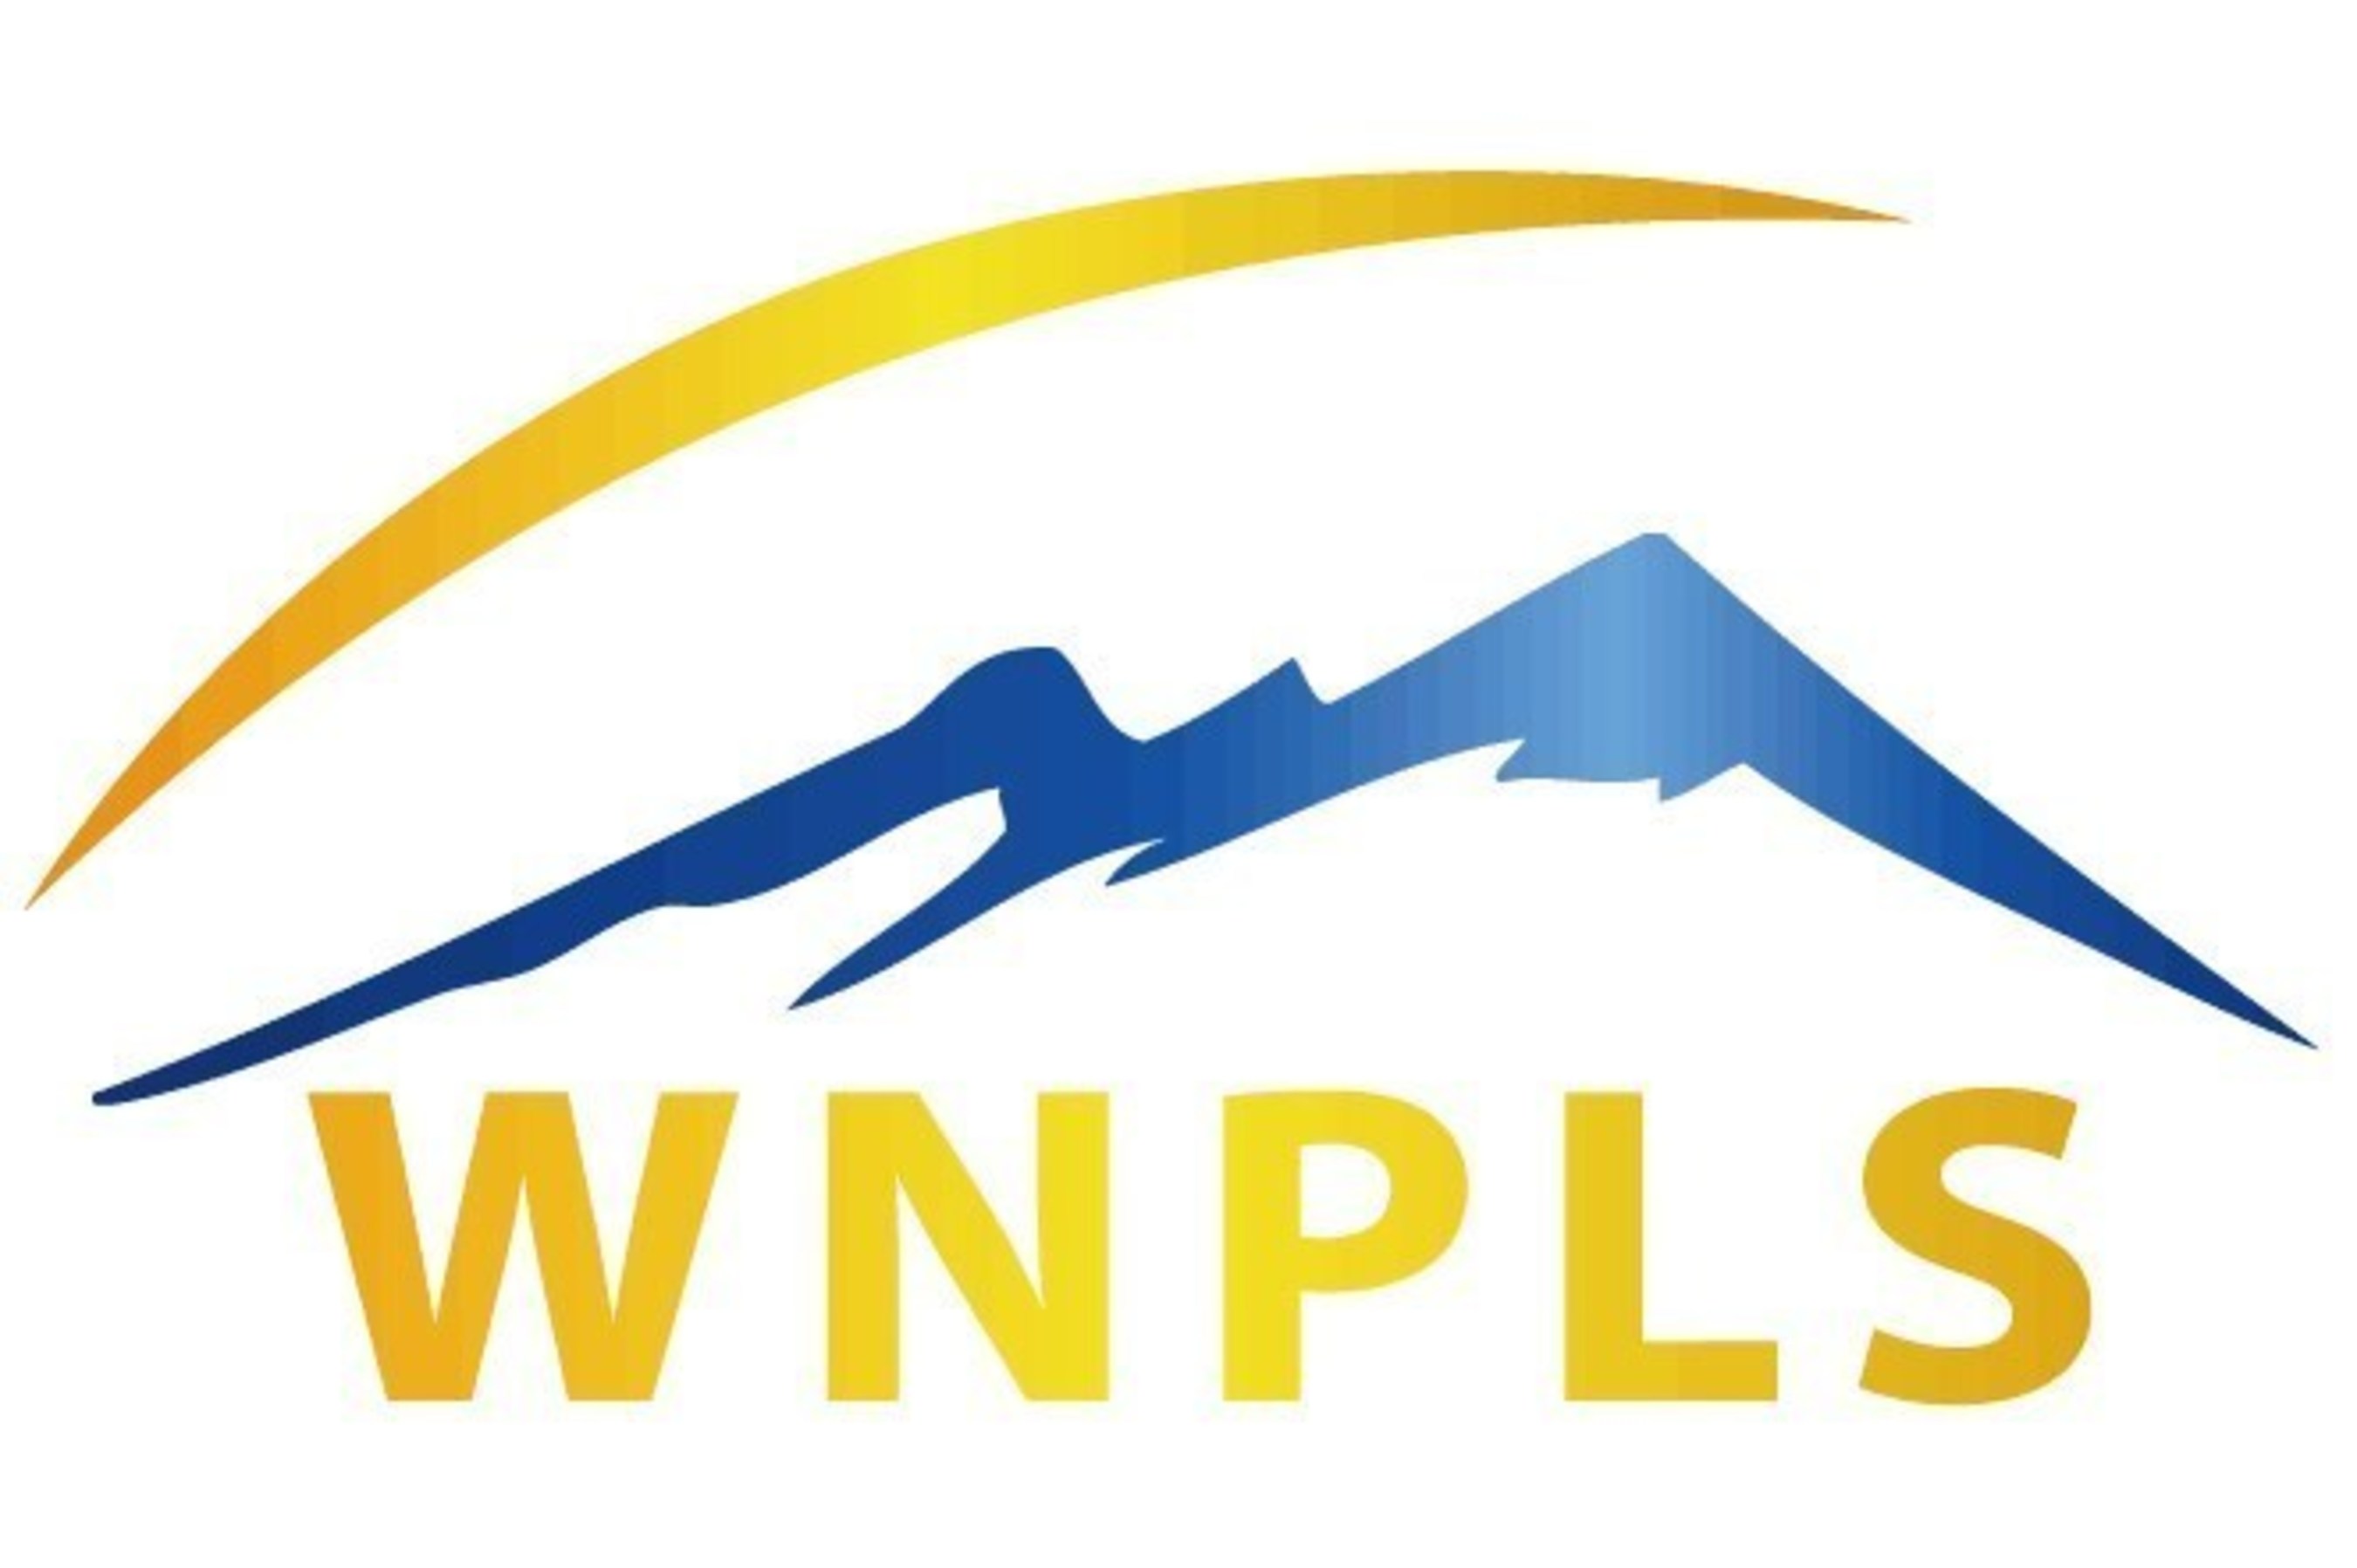 Six Nobel Prize Laureates and over 20 internationally acclaimed researchers and scientists will present at the third annual, "World Nobel Prize Laureate Summit" (WNPLS) in Chengdu, China, September 2-3, 2016. The 2016 WNPLS will feature three programs of scientific exploration: 1) "Anpac Bio World Youth Innovation Forum"; 2) "International Symposium for Precision Medicine"; and 3) the "Bio-Pharmaceutical Industry Forum".